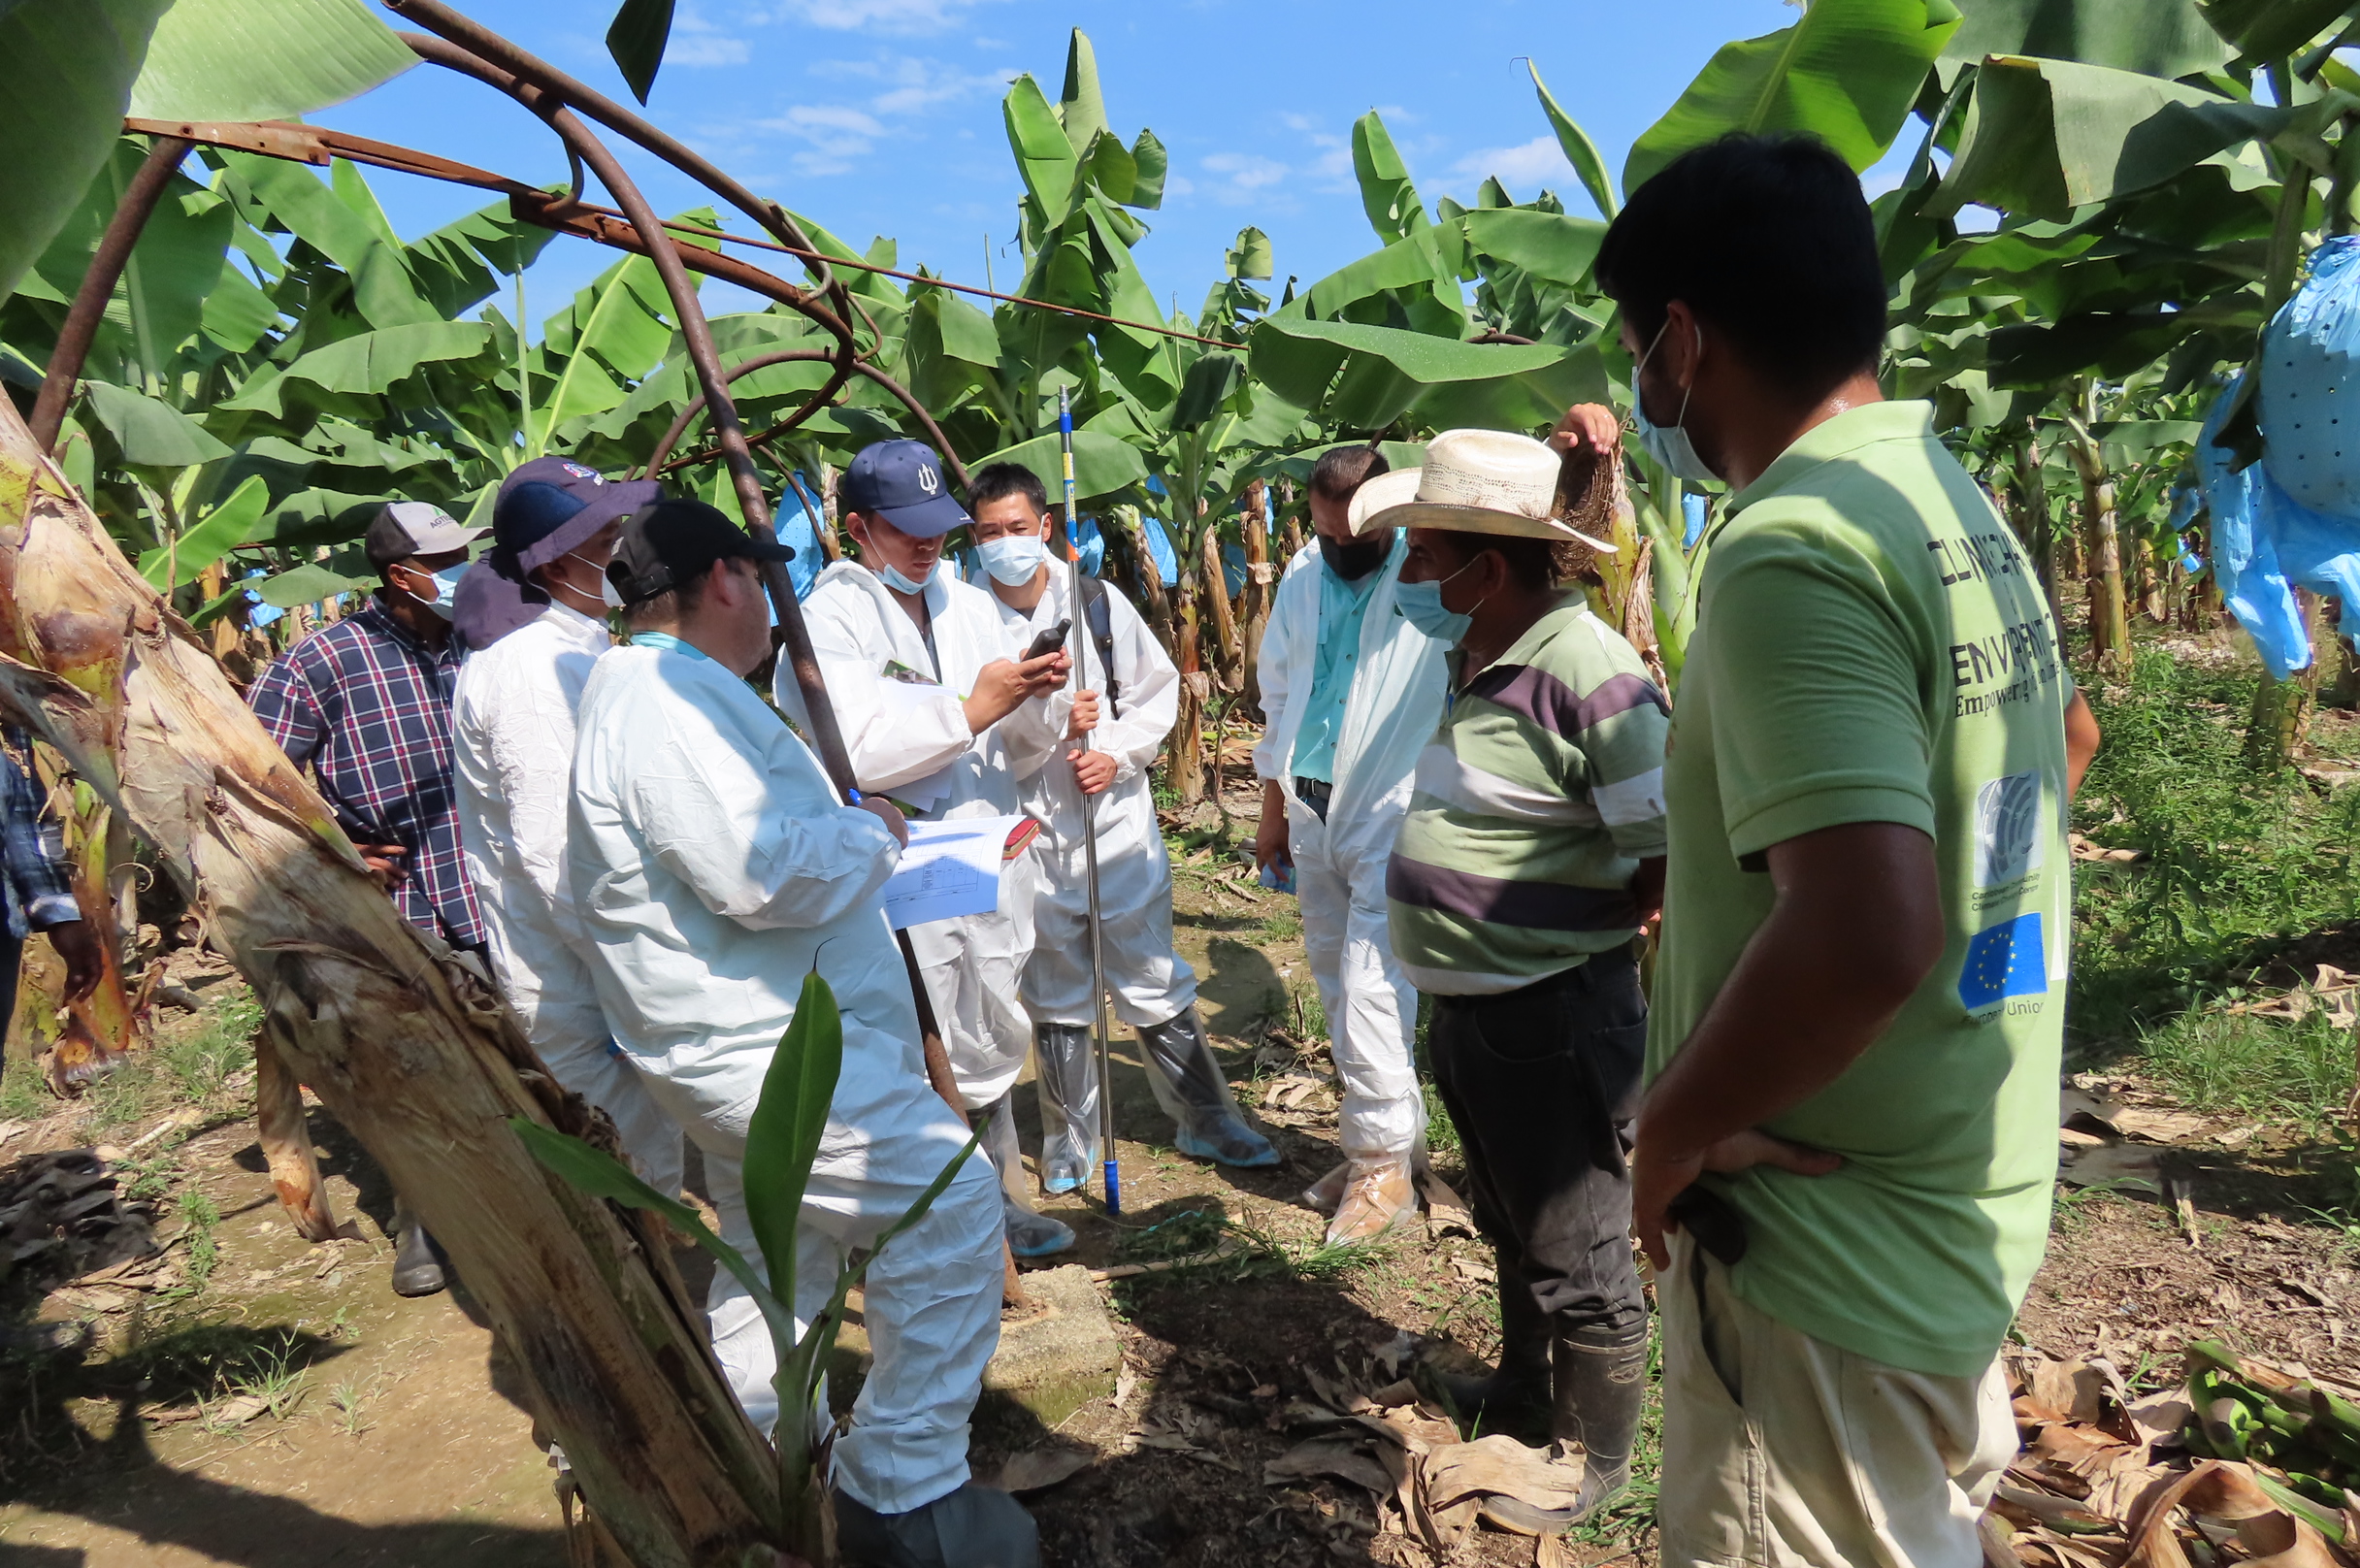 Regional project for the Prevention and Control of Fusarium TR4 of Banana in Central America